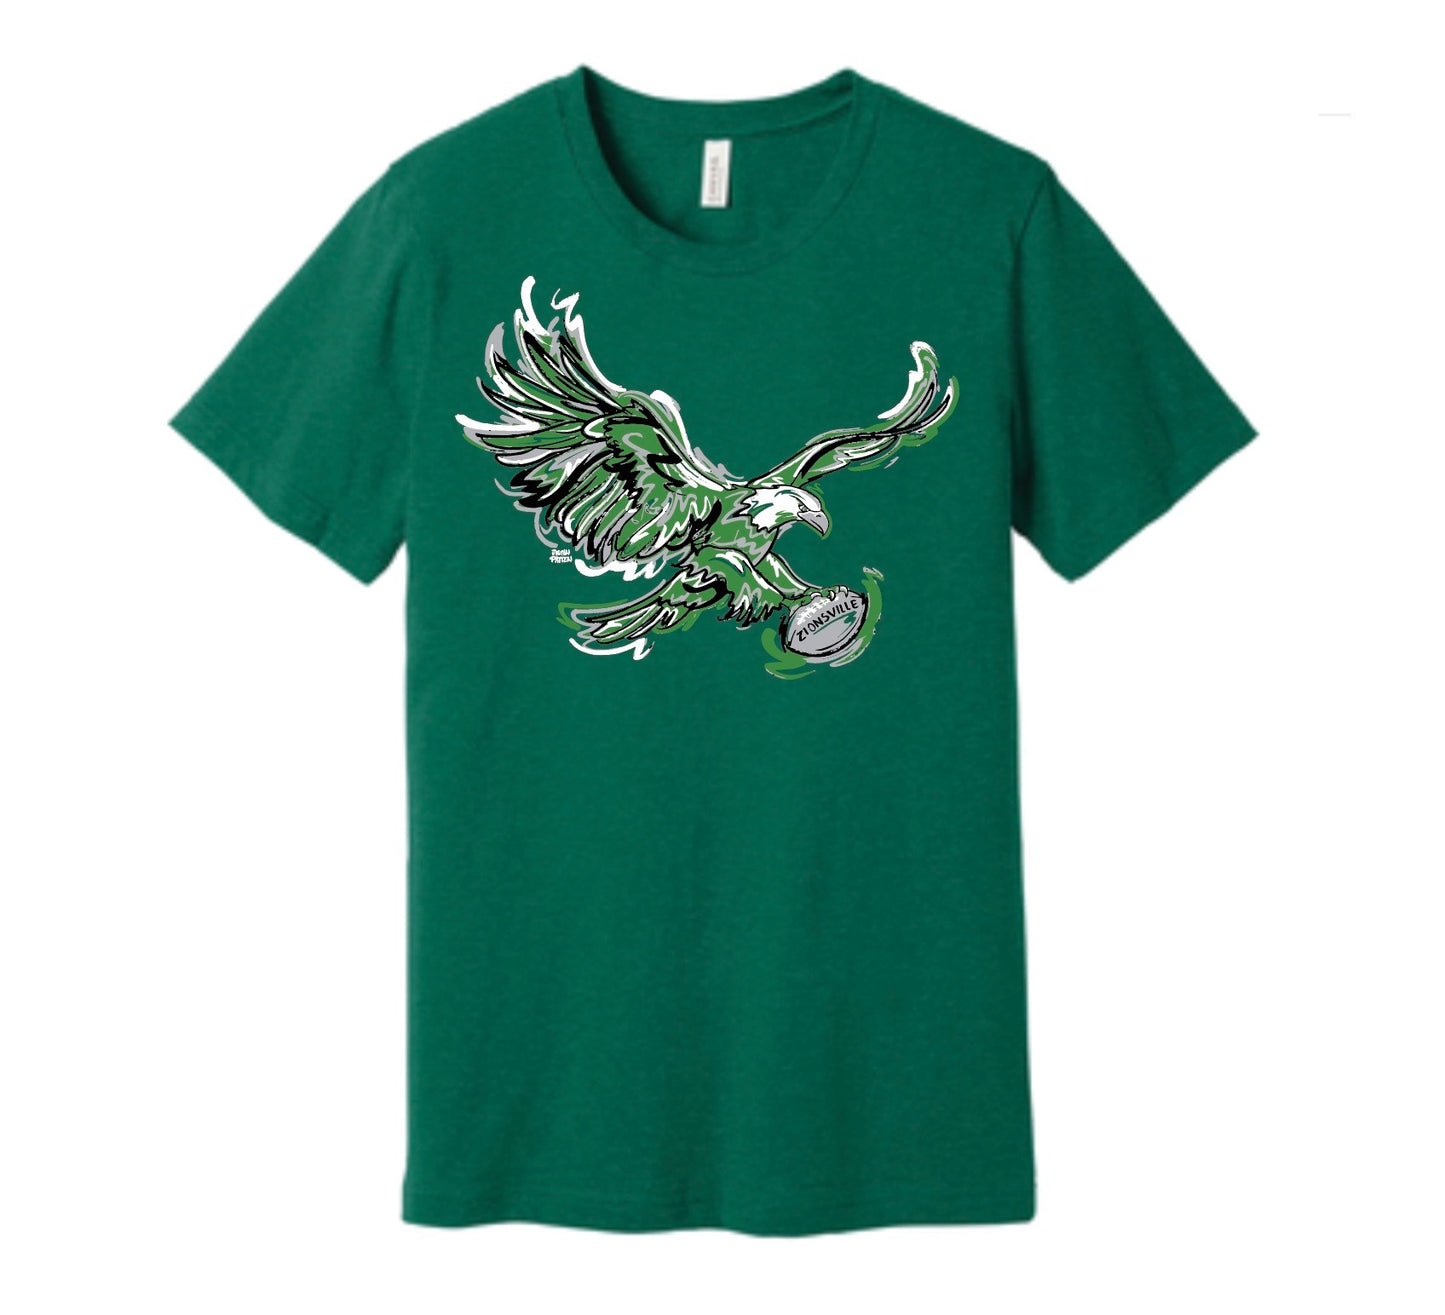 Zionsville Eagle Football Unisex Tee by Justin Patten (2 Colors)